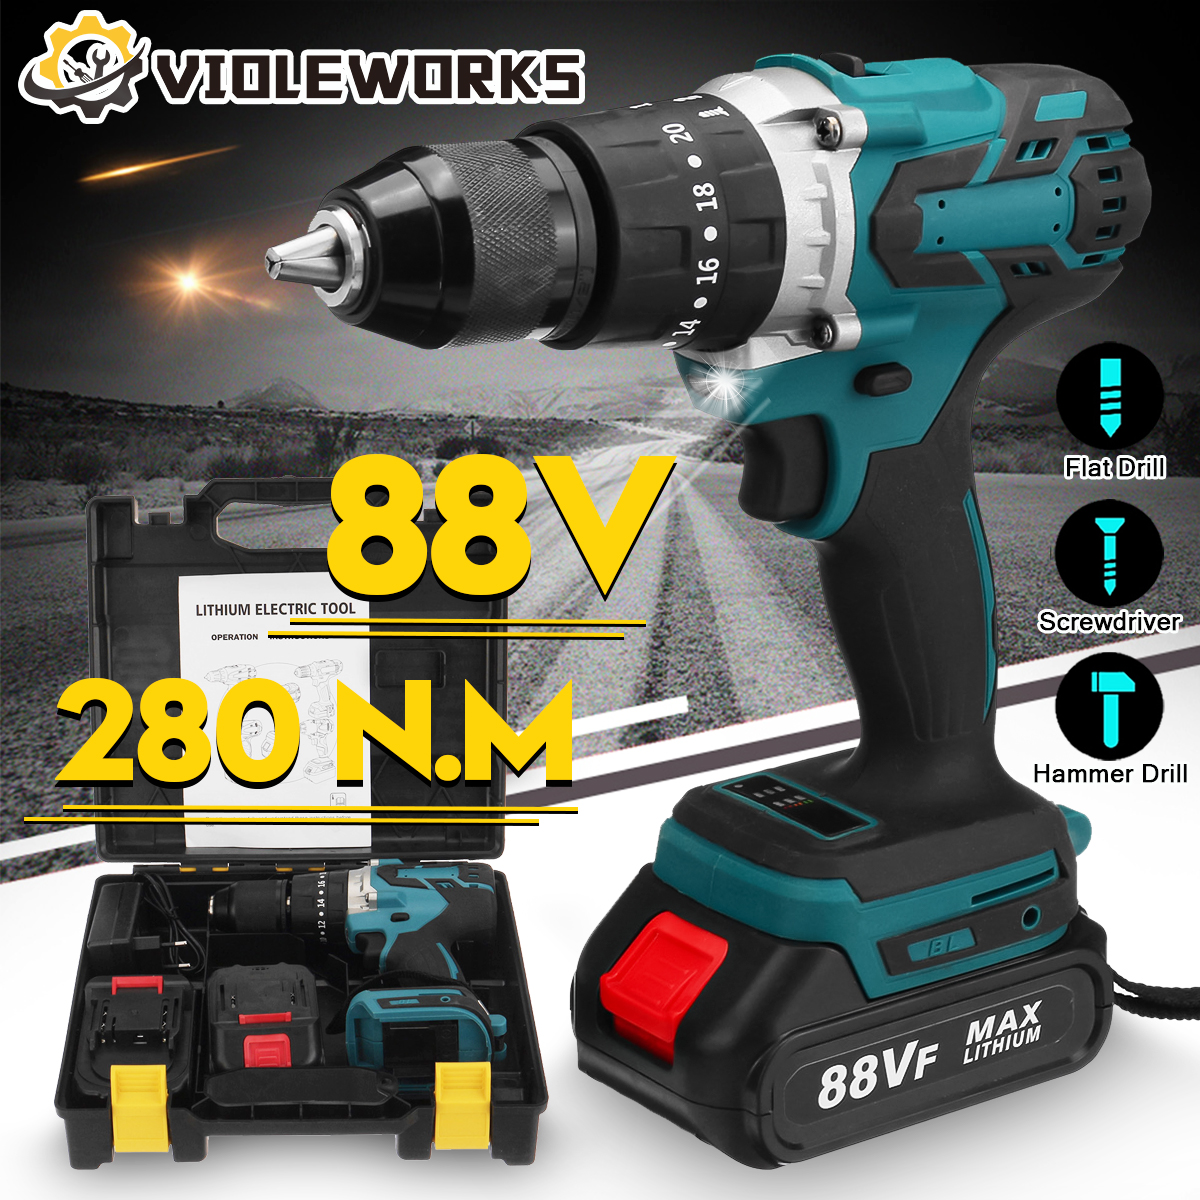 88VF-3-IN-1-Cordless-Brushless-Drill-Electric-Screwdriver-Hammer-Impact-Drill-203-Torque-W-12pcs-Bat-1854945-1